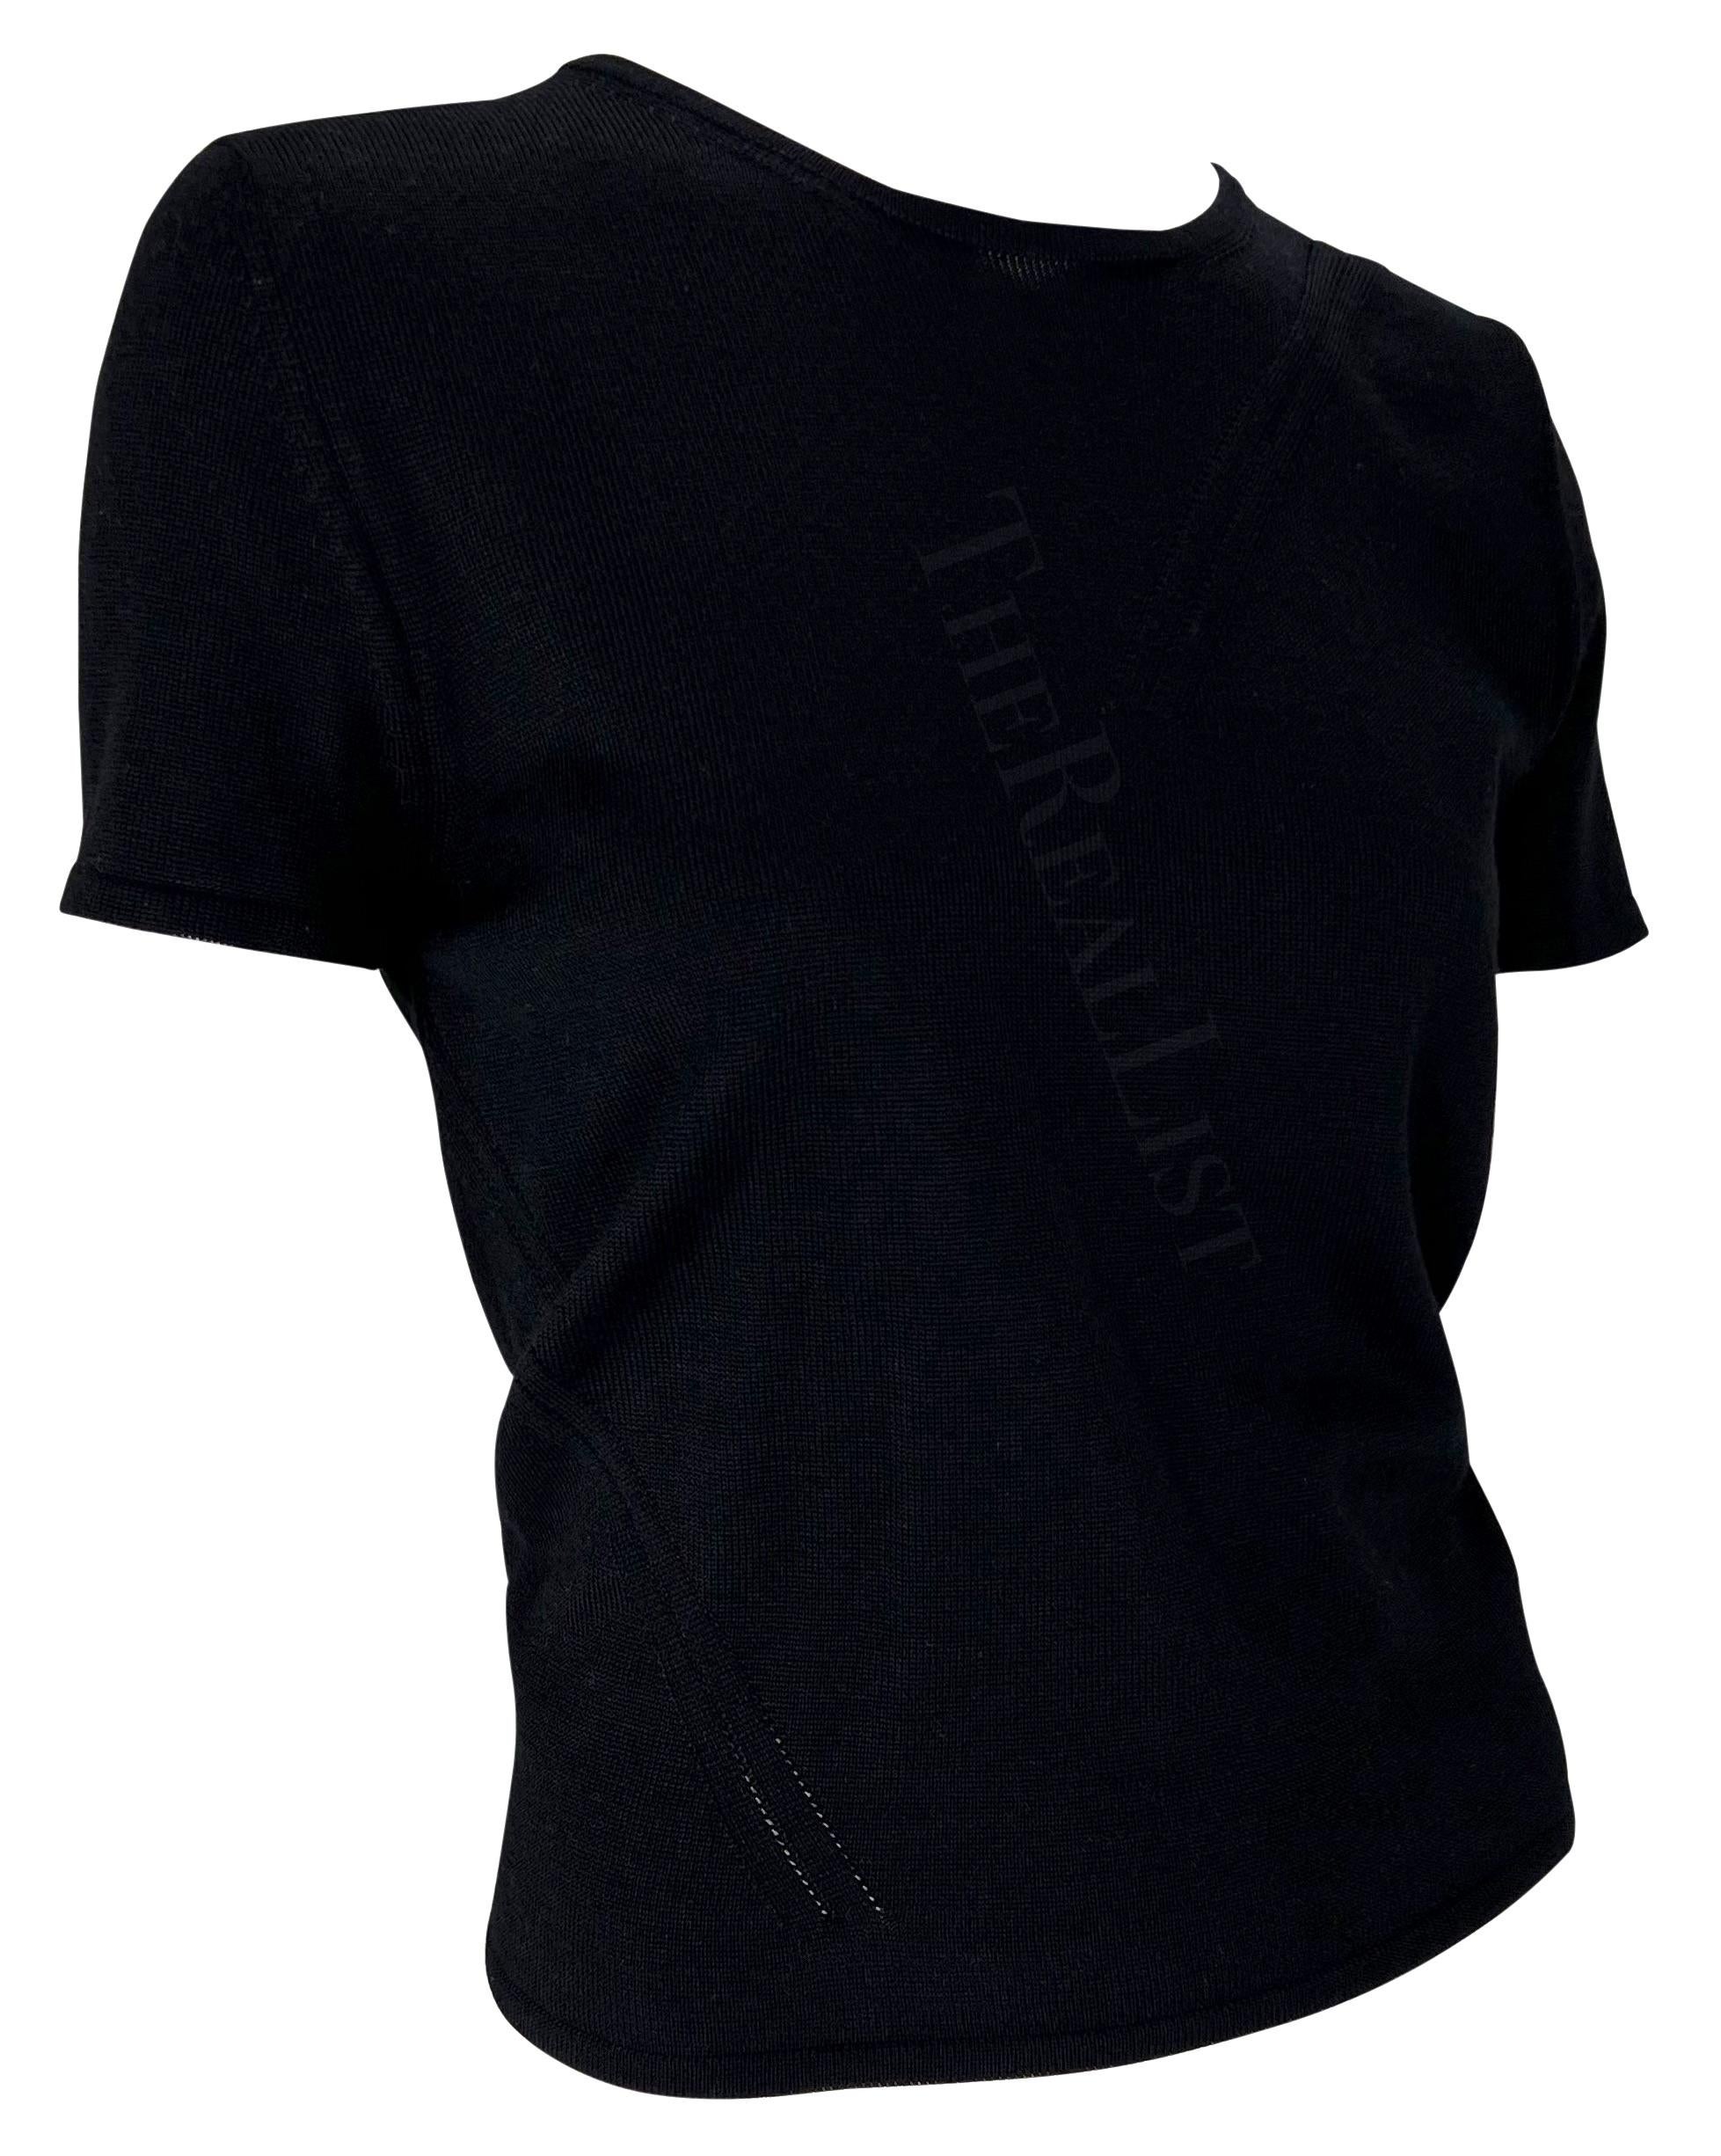 S/S 1997 Gucci by Tom Ford Open Back Black Stretch Knit Short-Sleeve Top In Good Condition For Sale In West Hollywood, CA